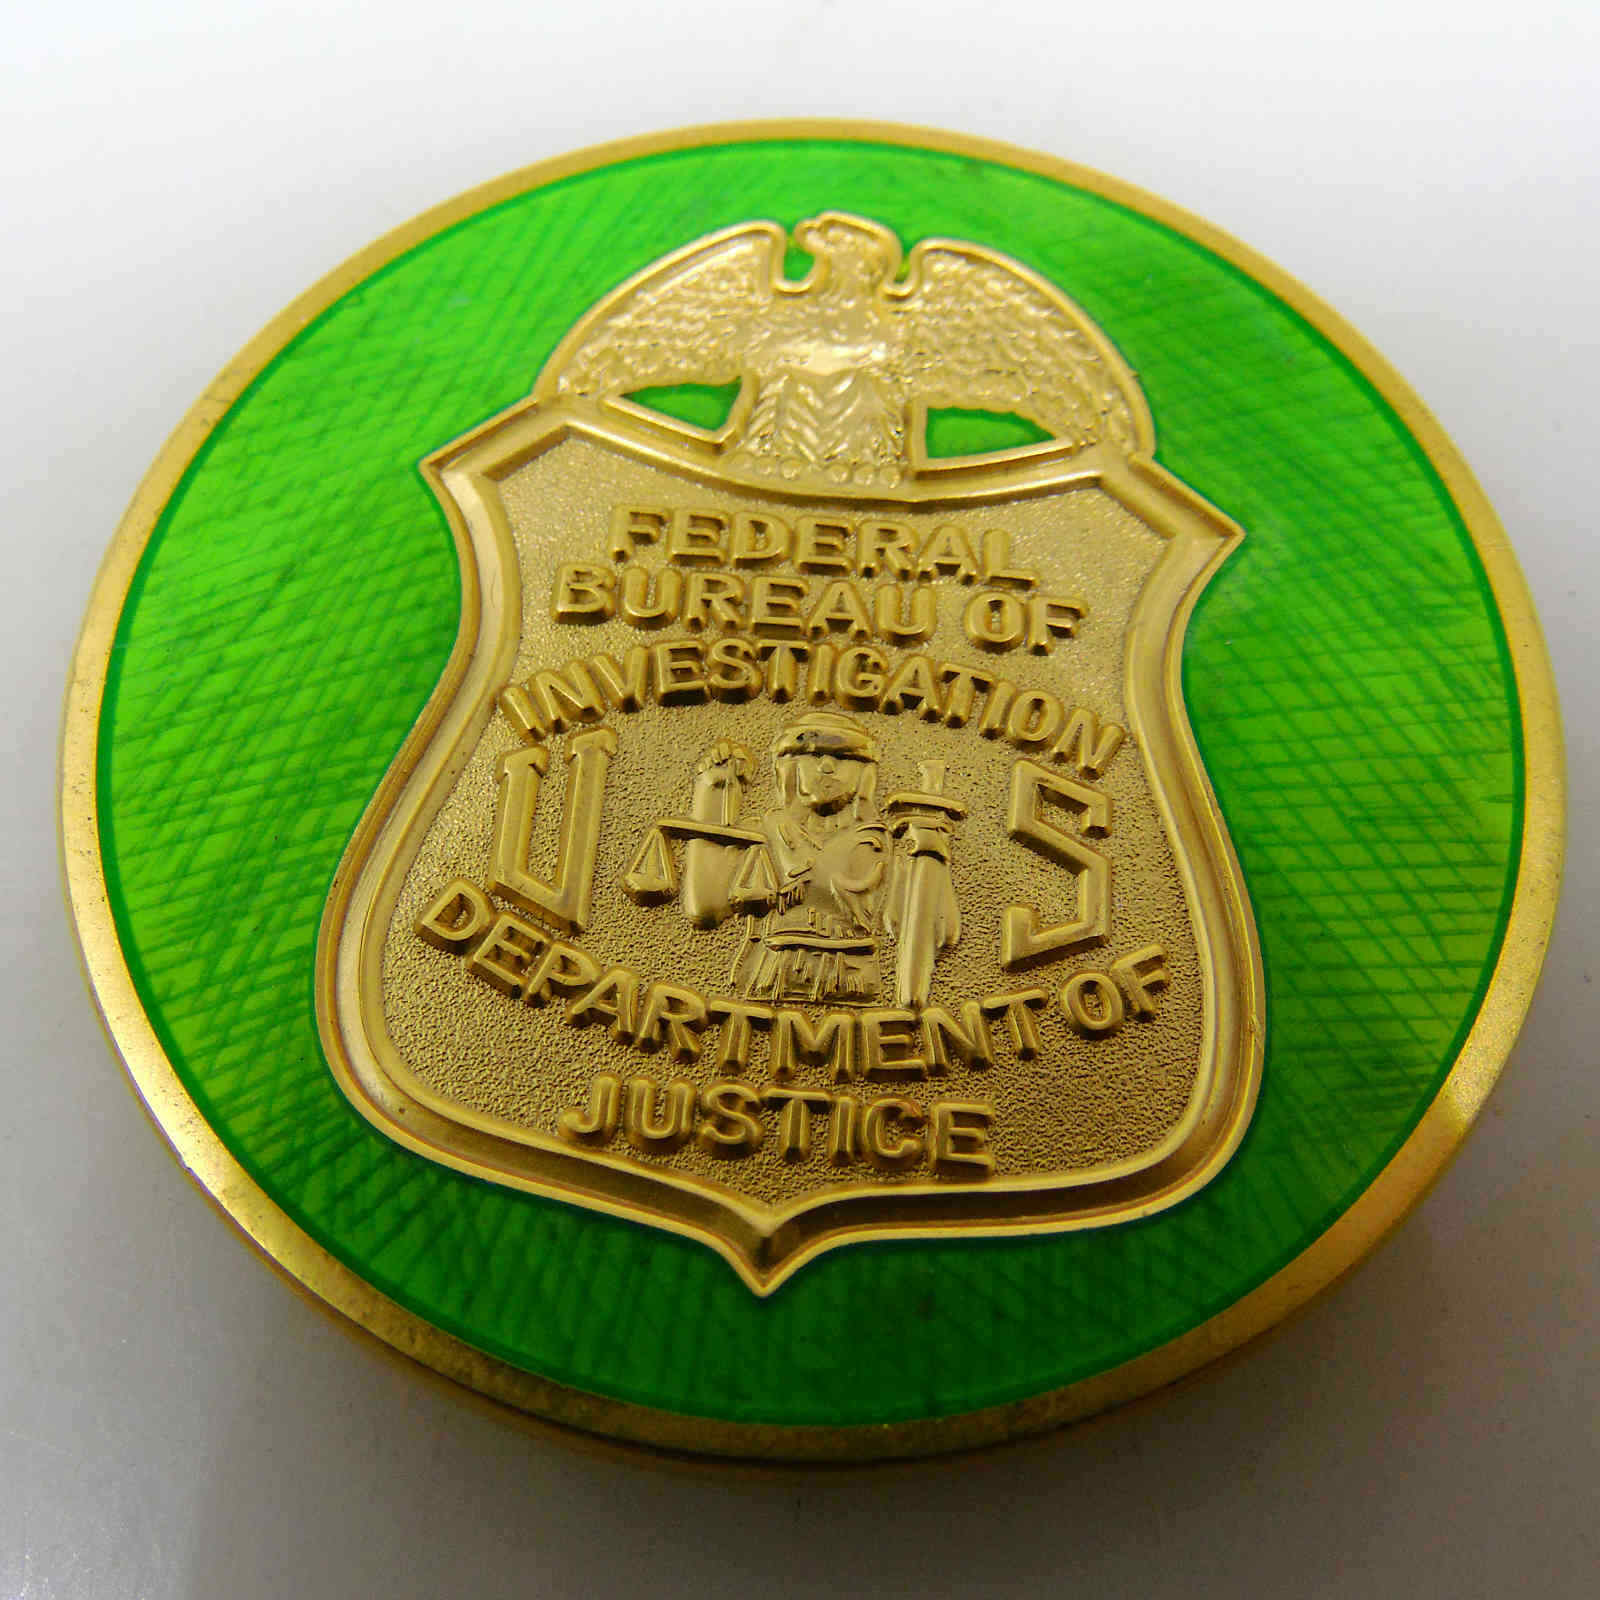 U.S. DEPARTMENT OF JUSTICE FEDERAL BUREAU OF INVESTIGATION CHALLENGE COIN